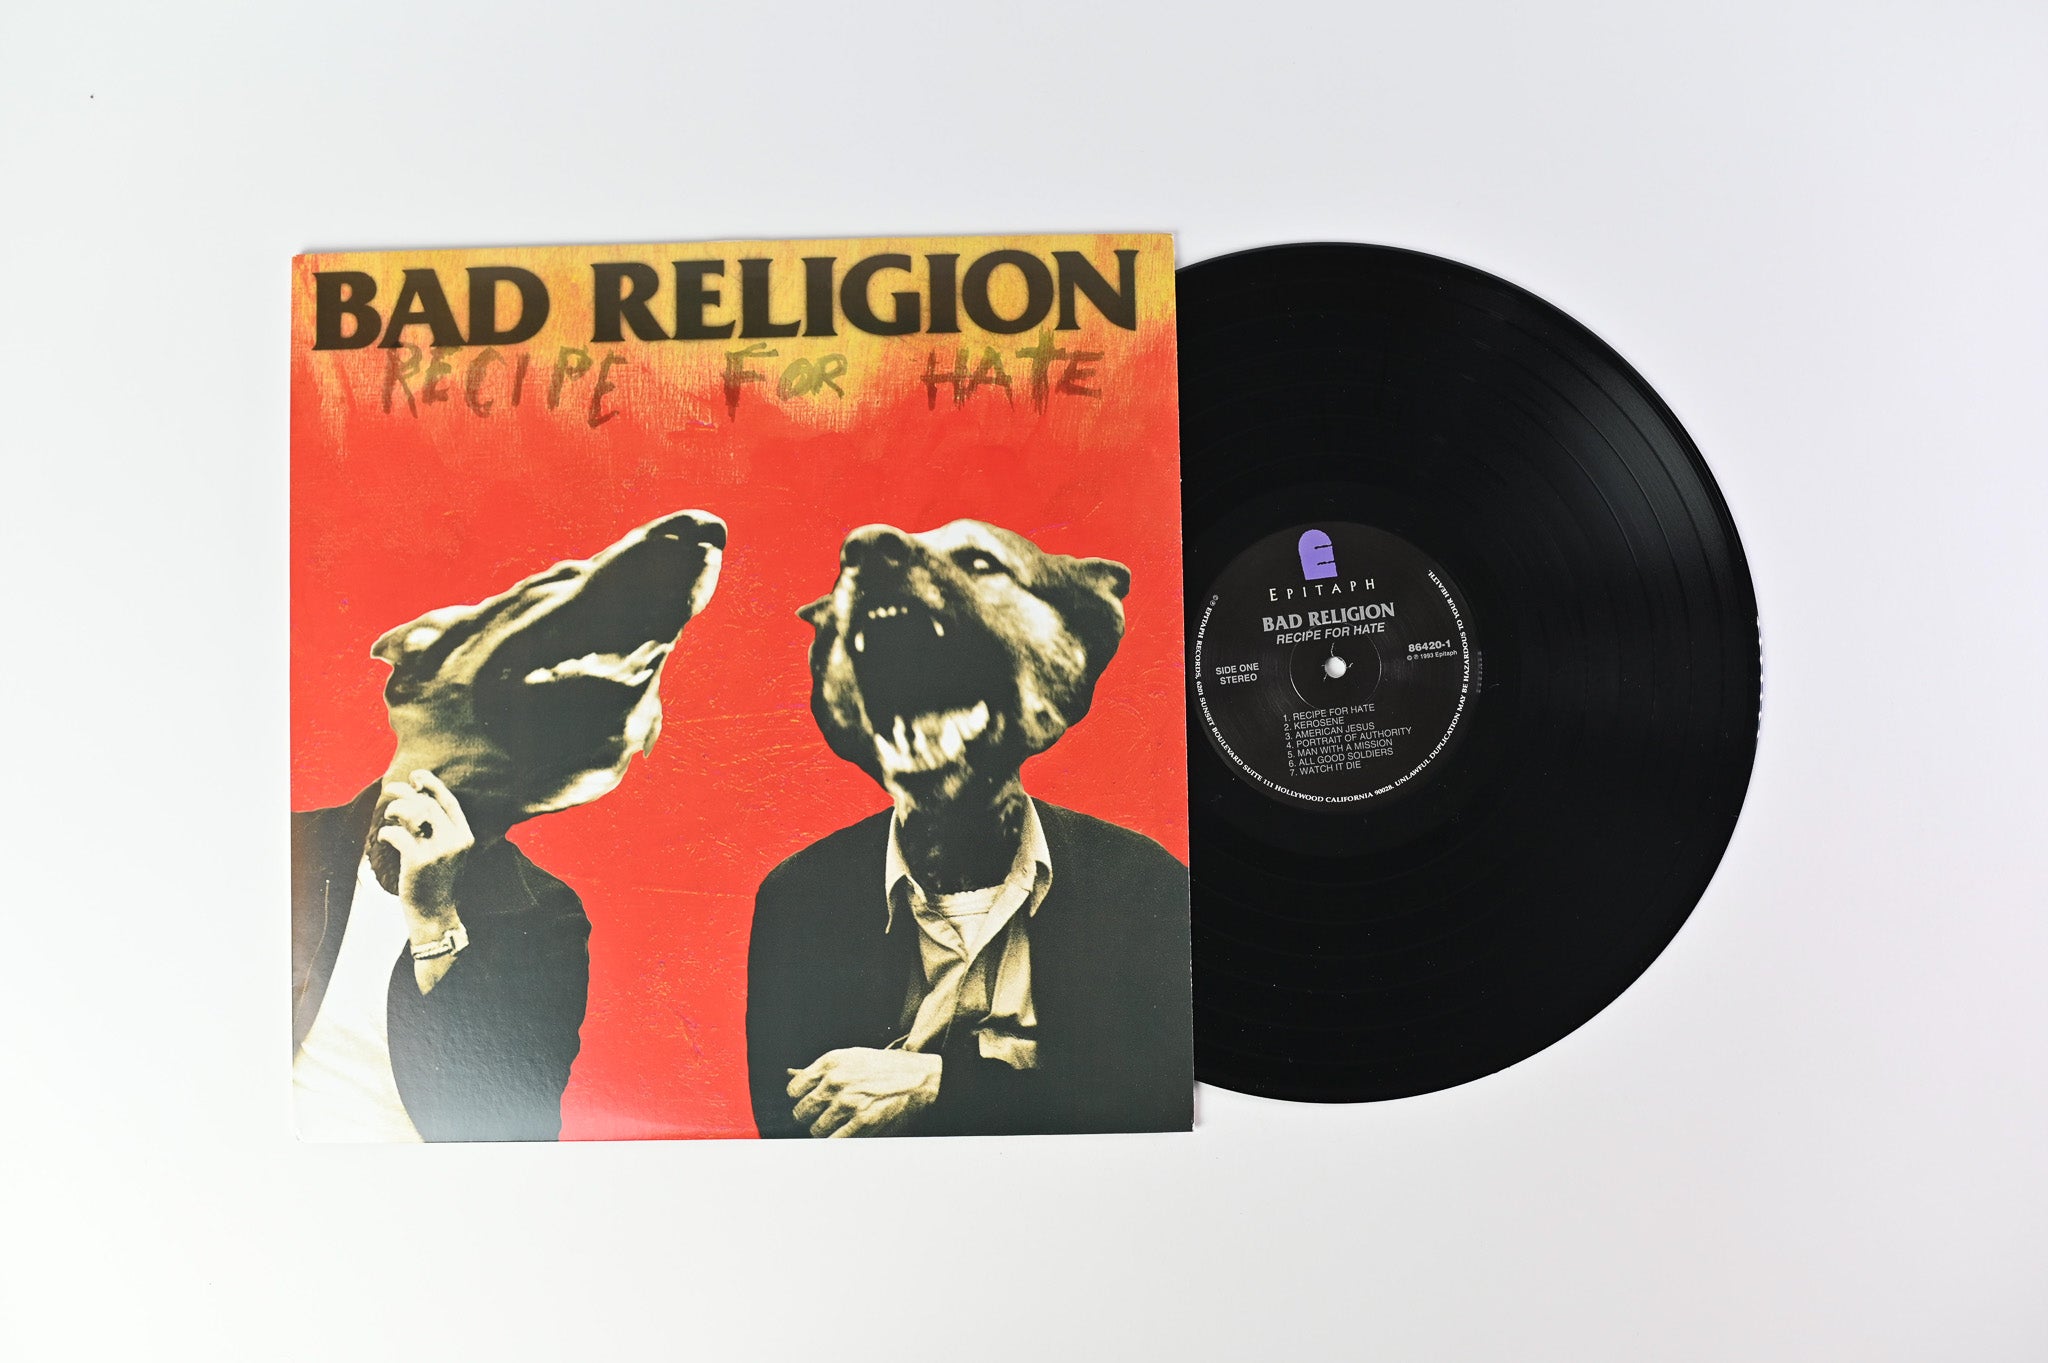 Bad Religion - Recipe For Hate on Epitaph Early Reissue